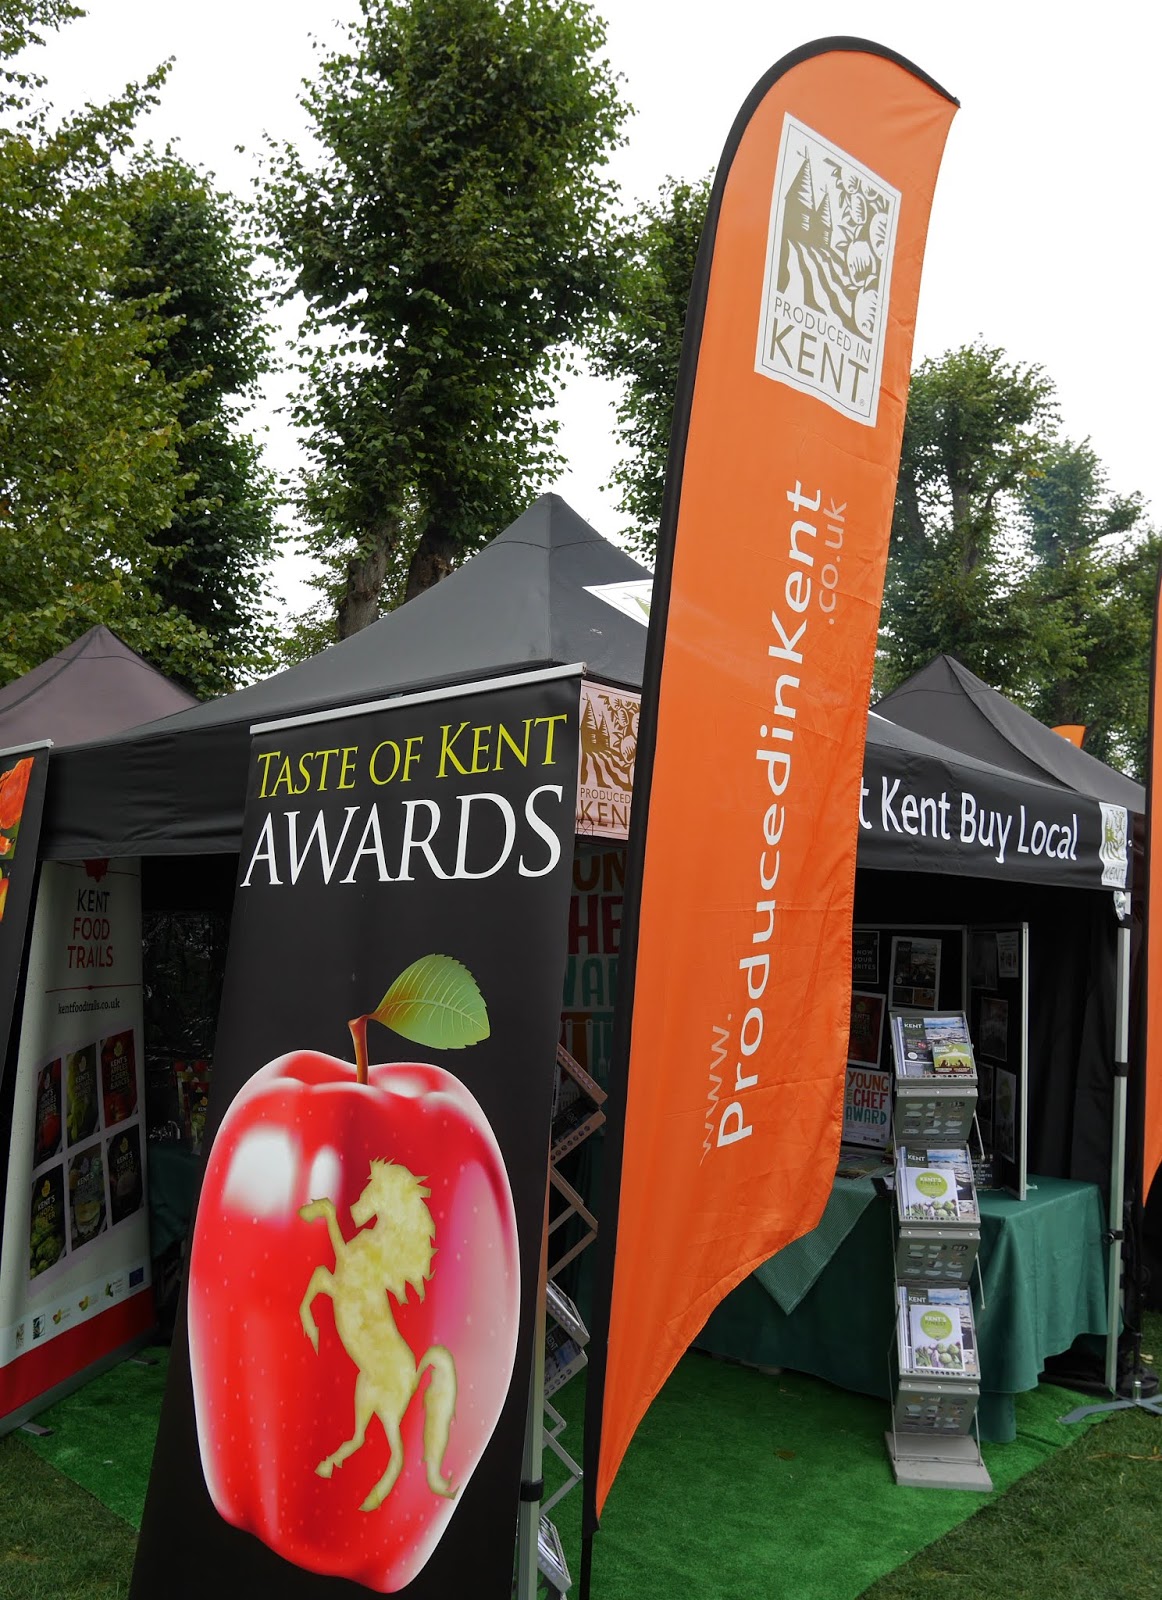 Taste of Kent Awards sign at the Canterbury Food Festival